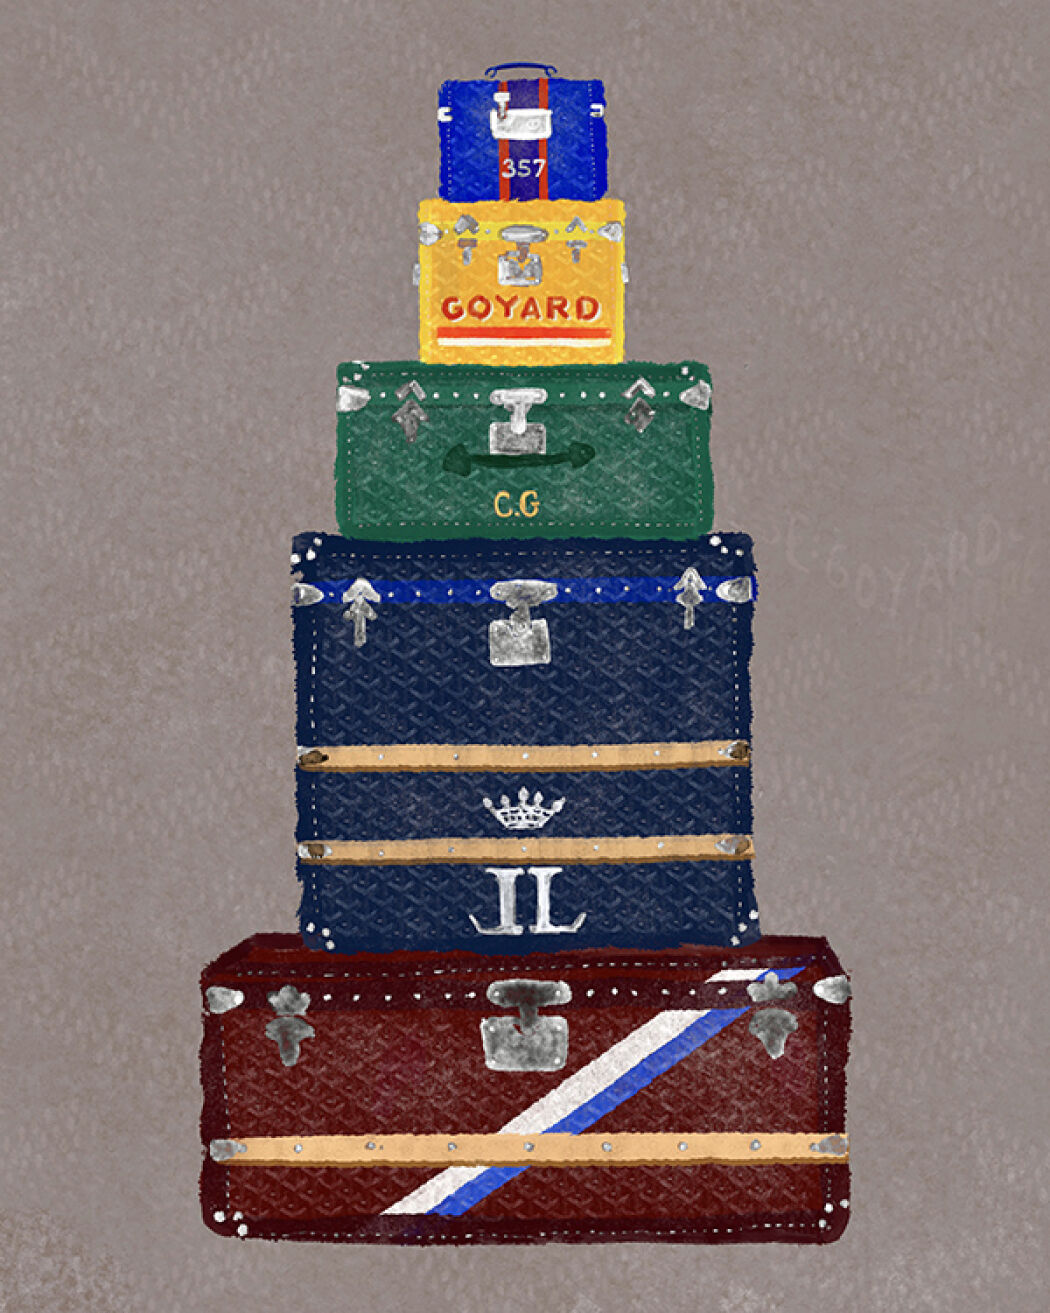 Christmas campaign drawings by Christina Gliha for Louis Vuitton